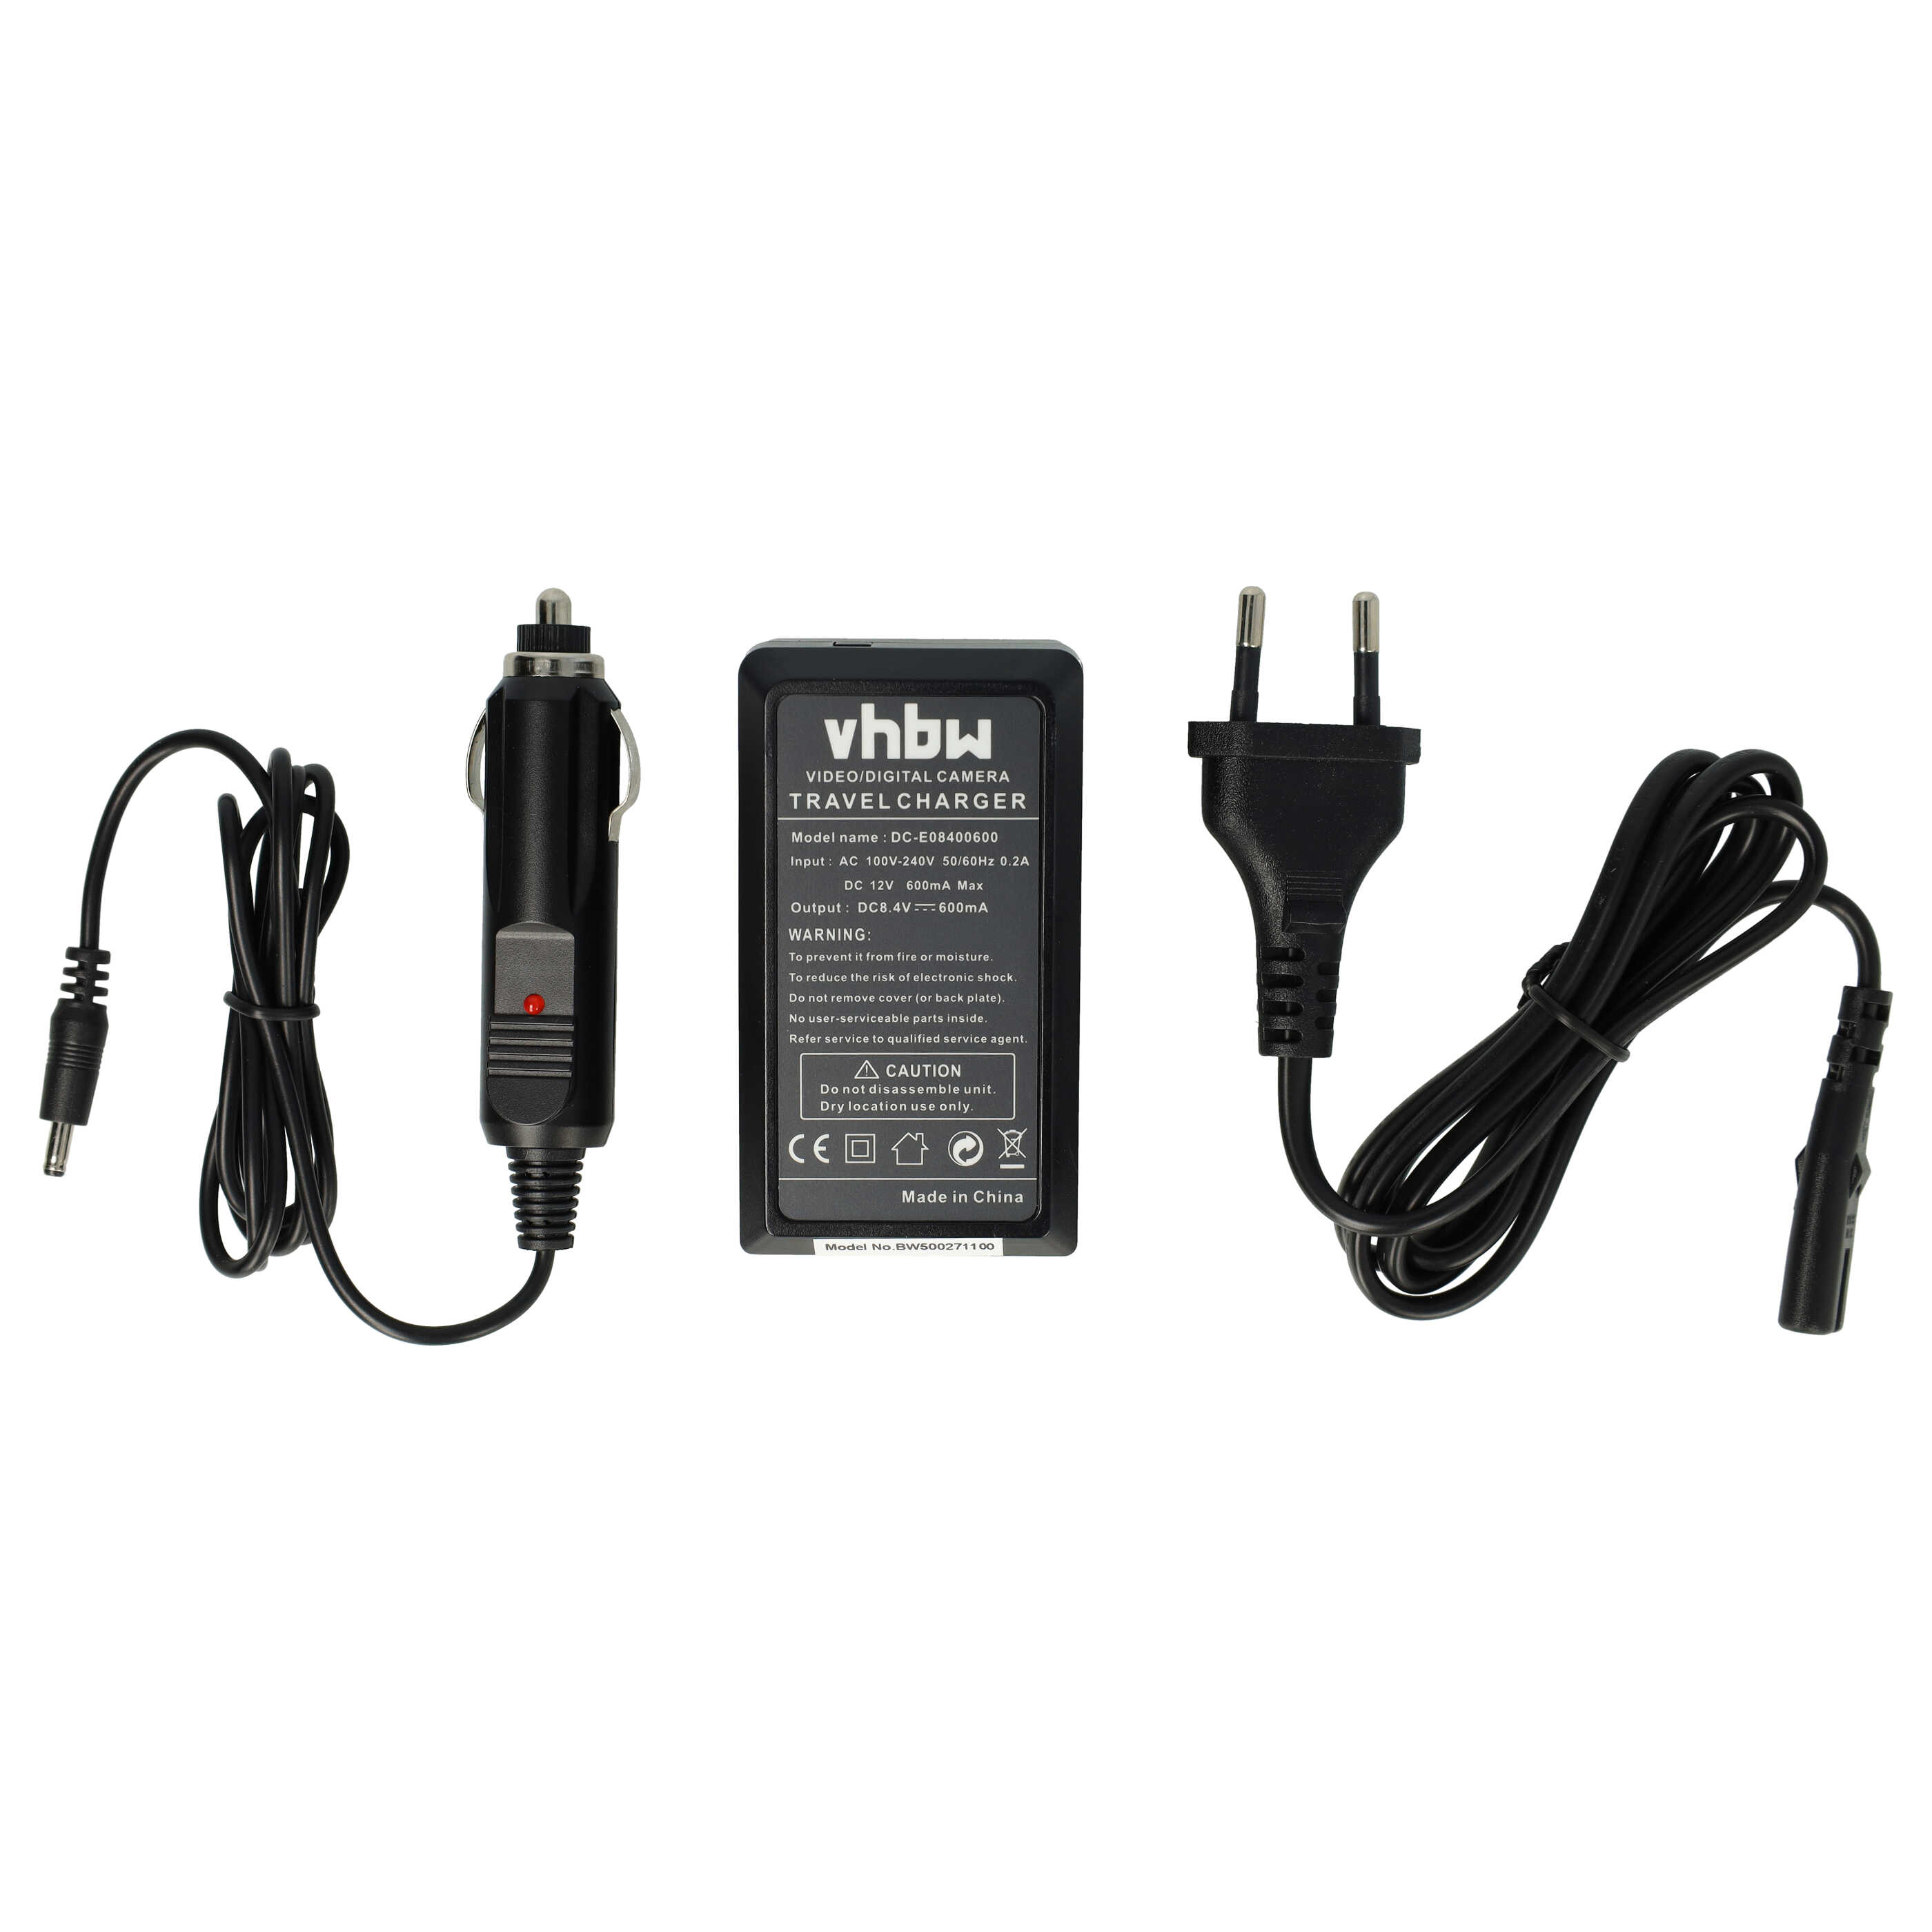 Battery Charger replaces Canon CB-2LWE suitable for Canon NB-2L Camera etc. - 0.6 A, 8.4 V